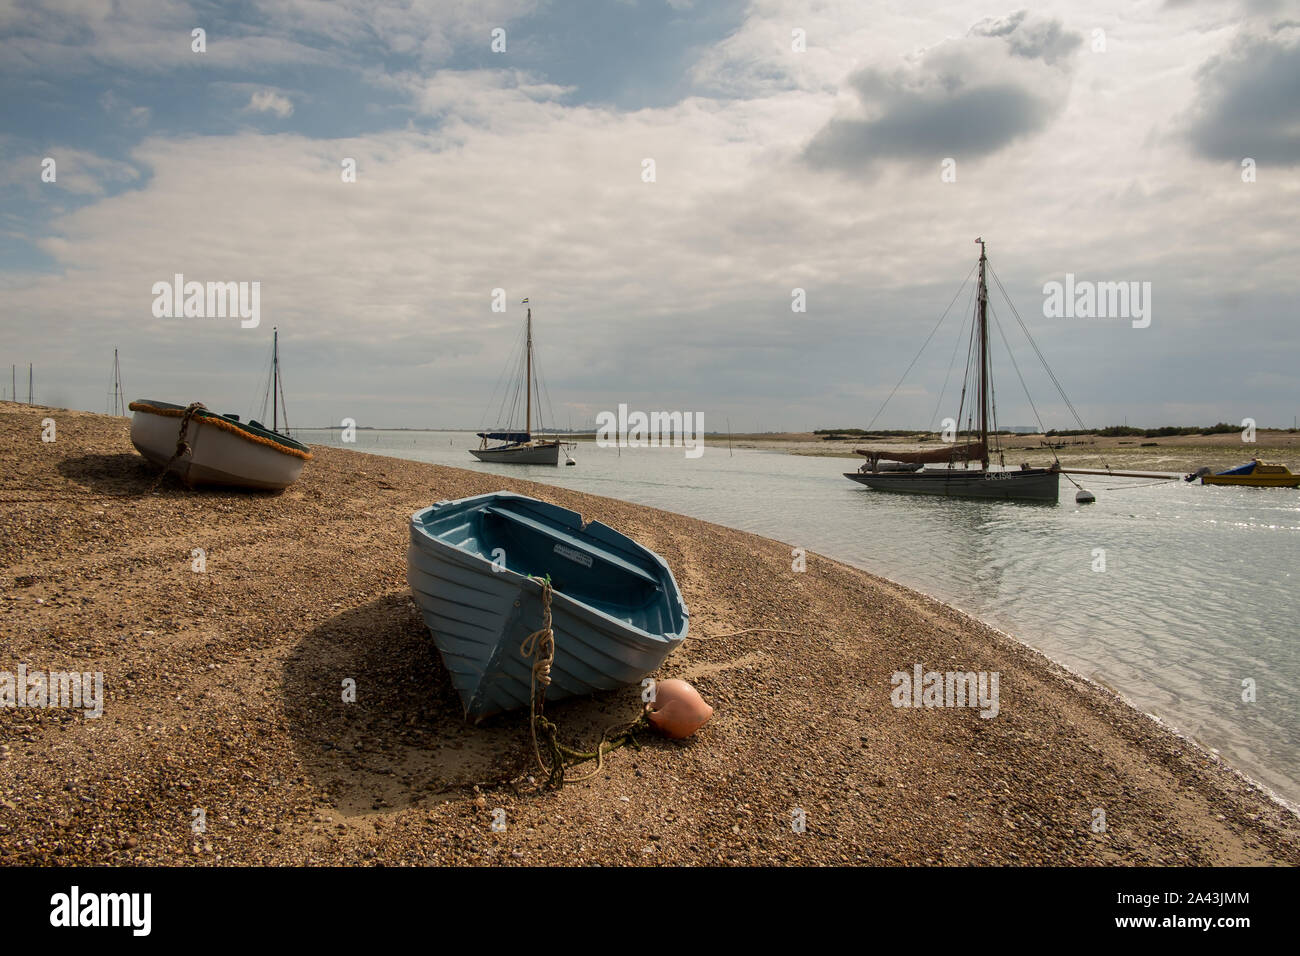 West Mersea on Mersea Island, Essex is well known for it's oyster fishing community and quality seafood restaurants. Stock Photo